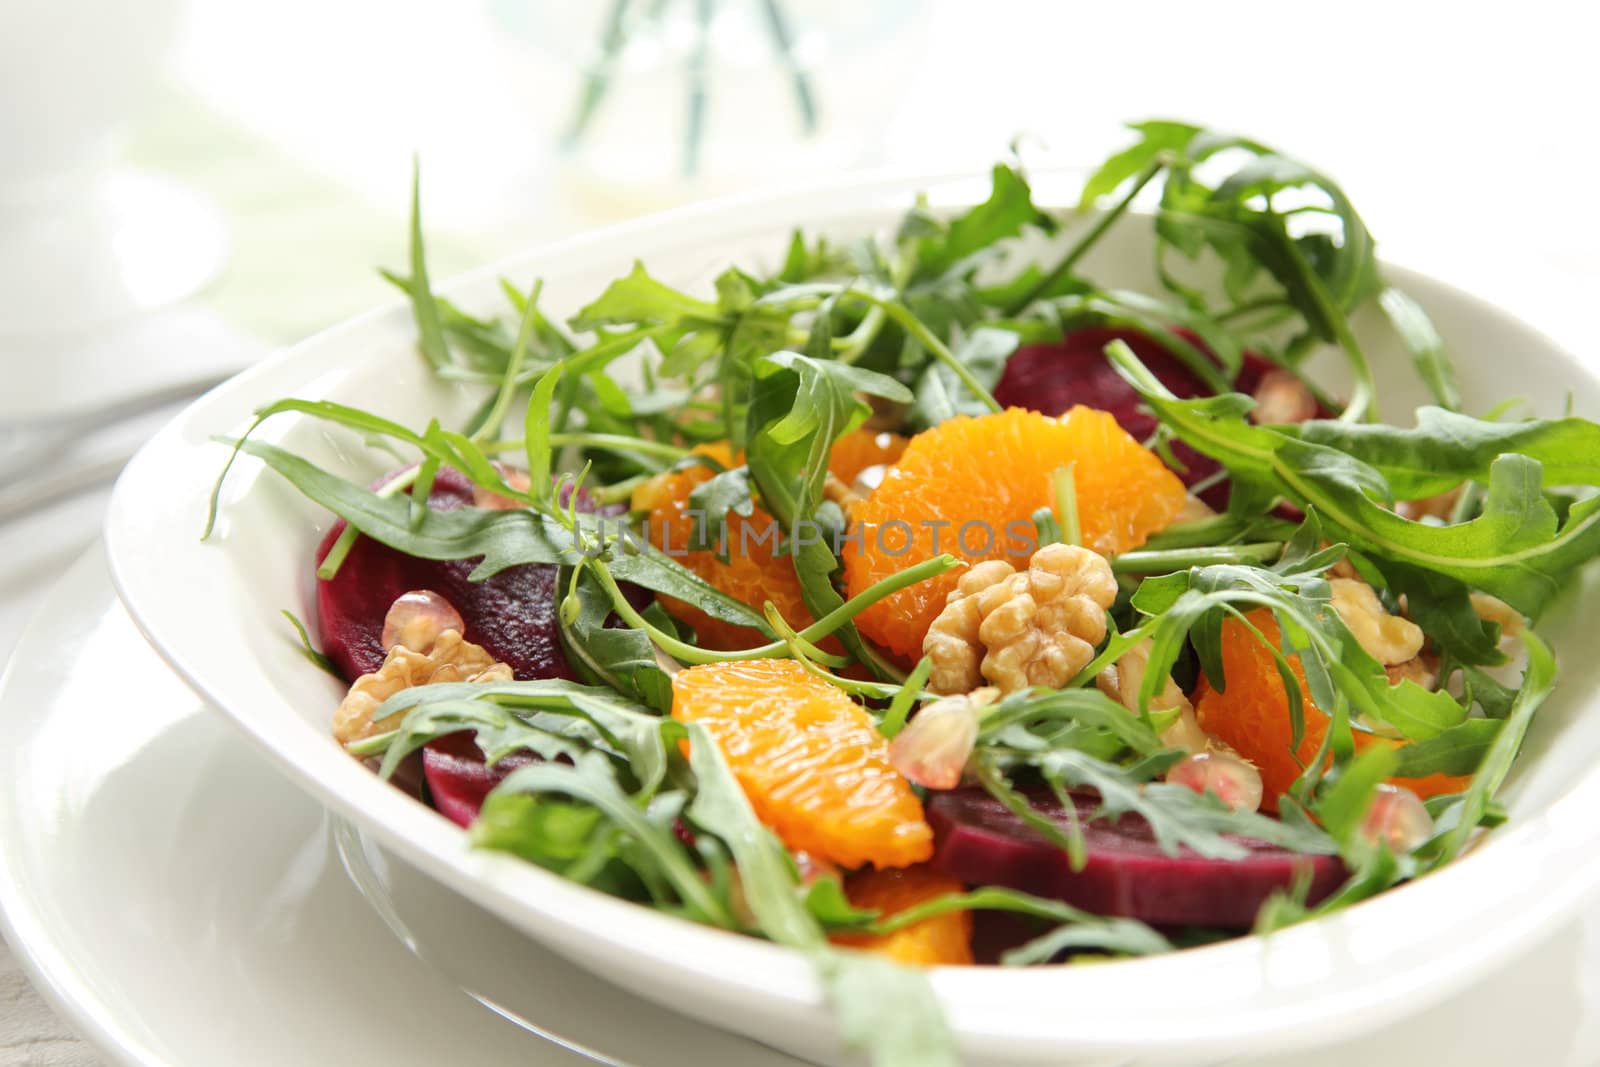 Rocket with orange and beetroot salad by vanillaechoes